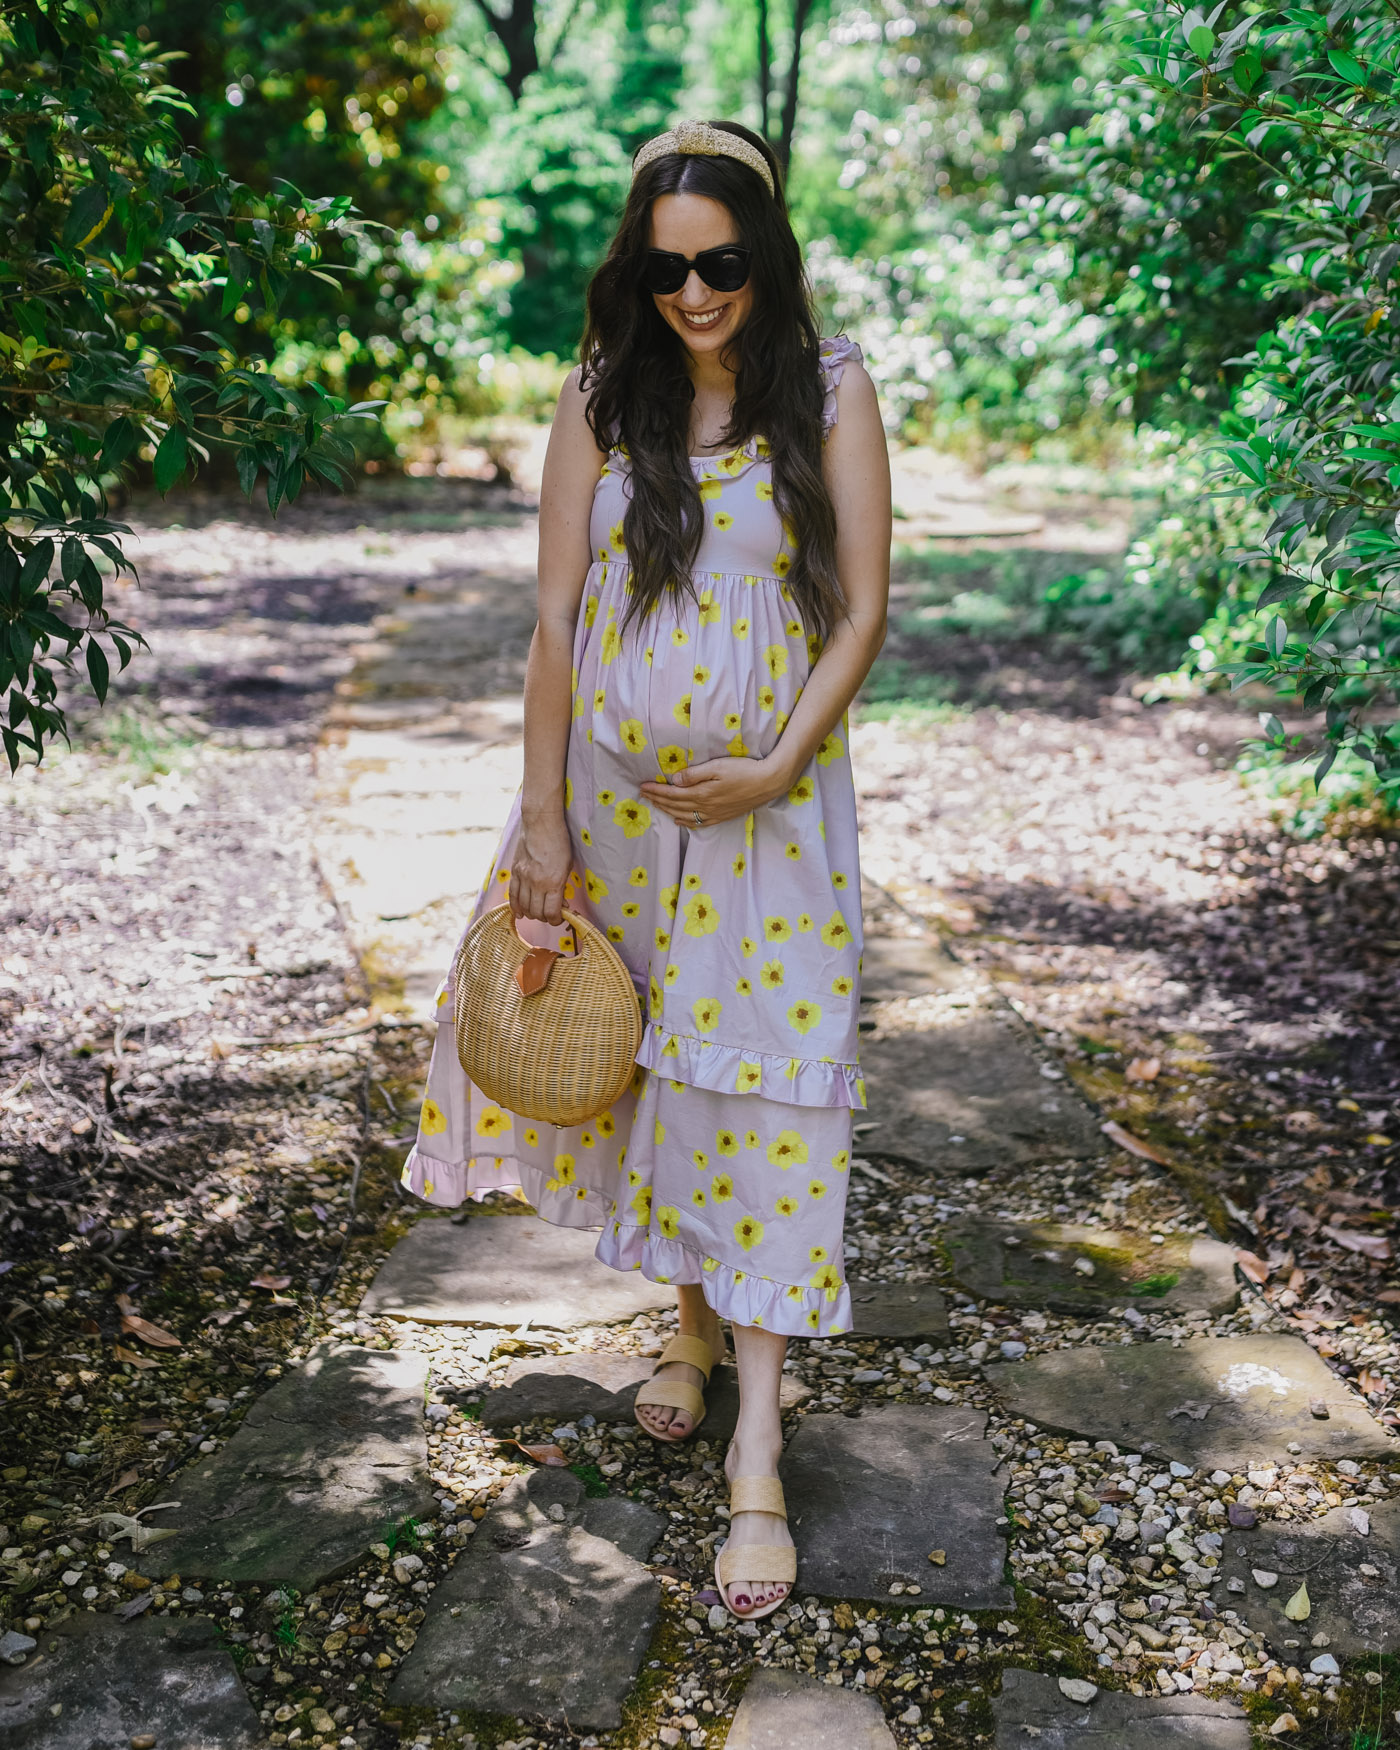 Pregnancy Tips by popular Memphis motherhood blog, Lone Star Looking Glass: image of a woman standing outside on a stone path and wearing a Hatch The Rafaela Dress, Knotted raffia headband, black sunglasses, and Raye Judah Slide.